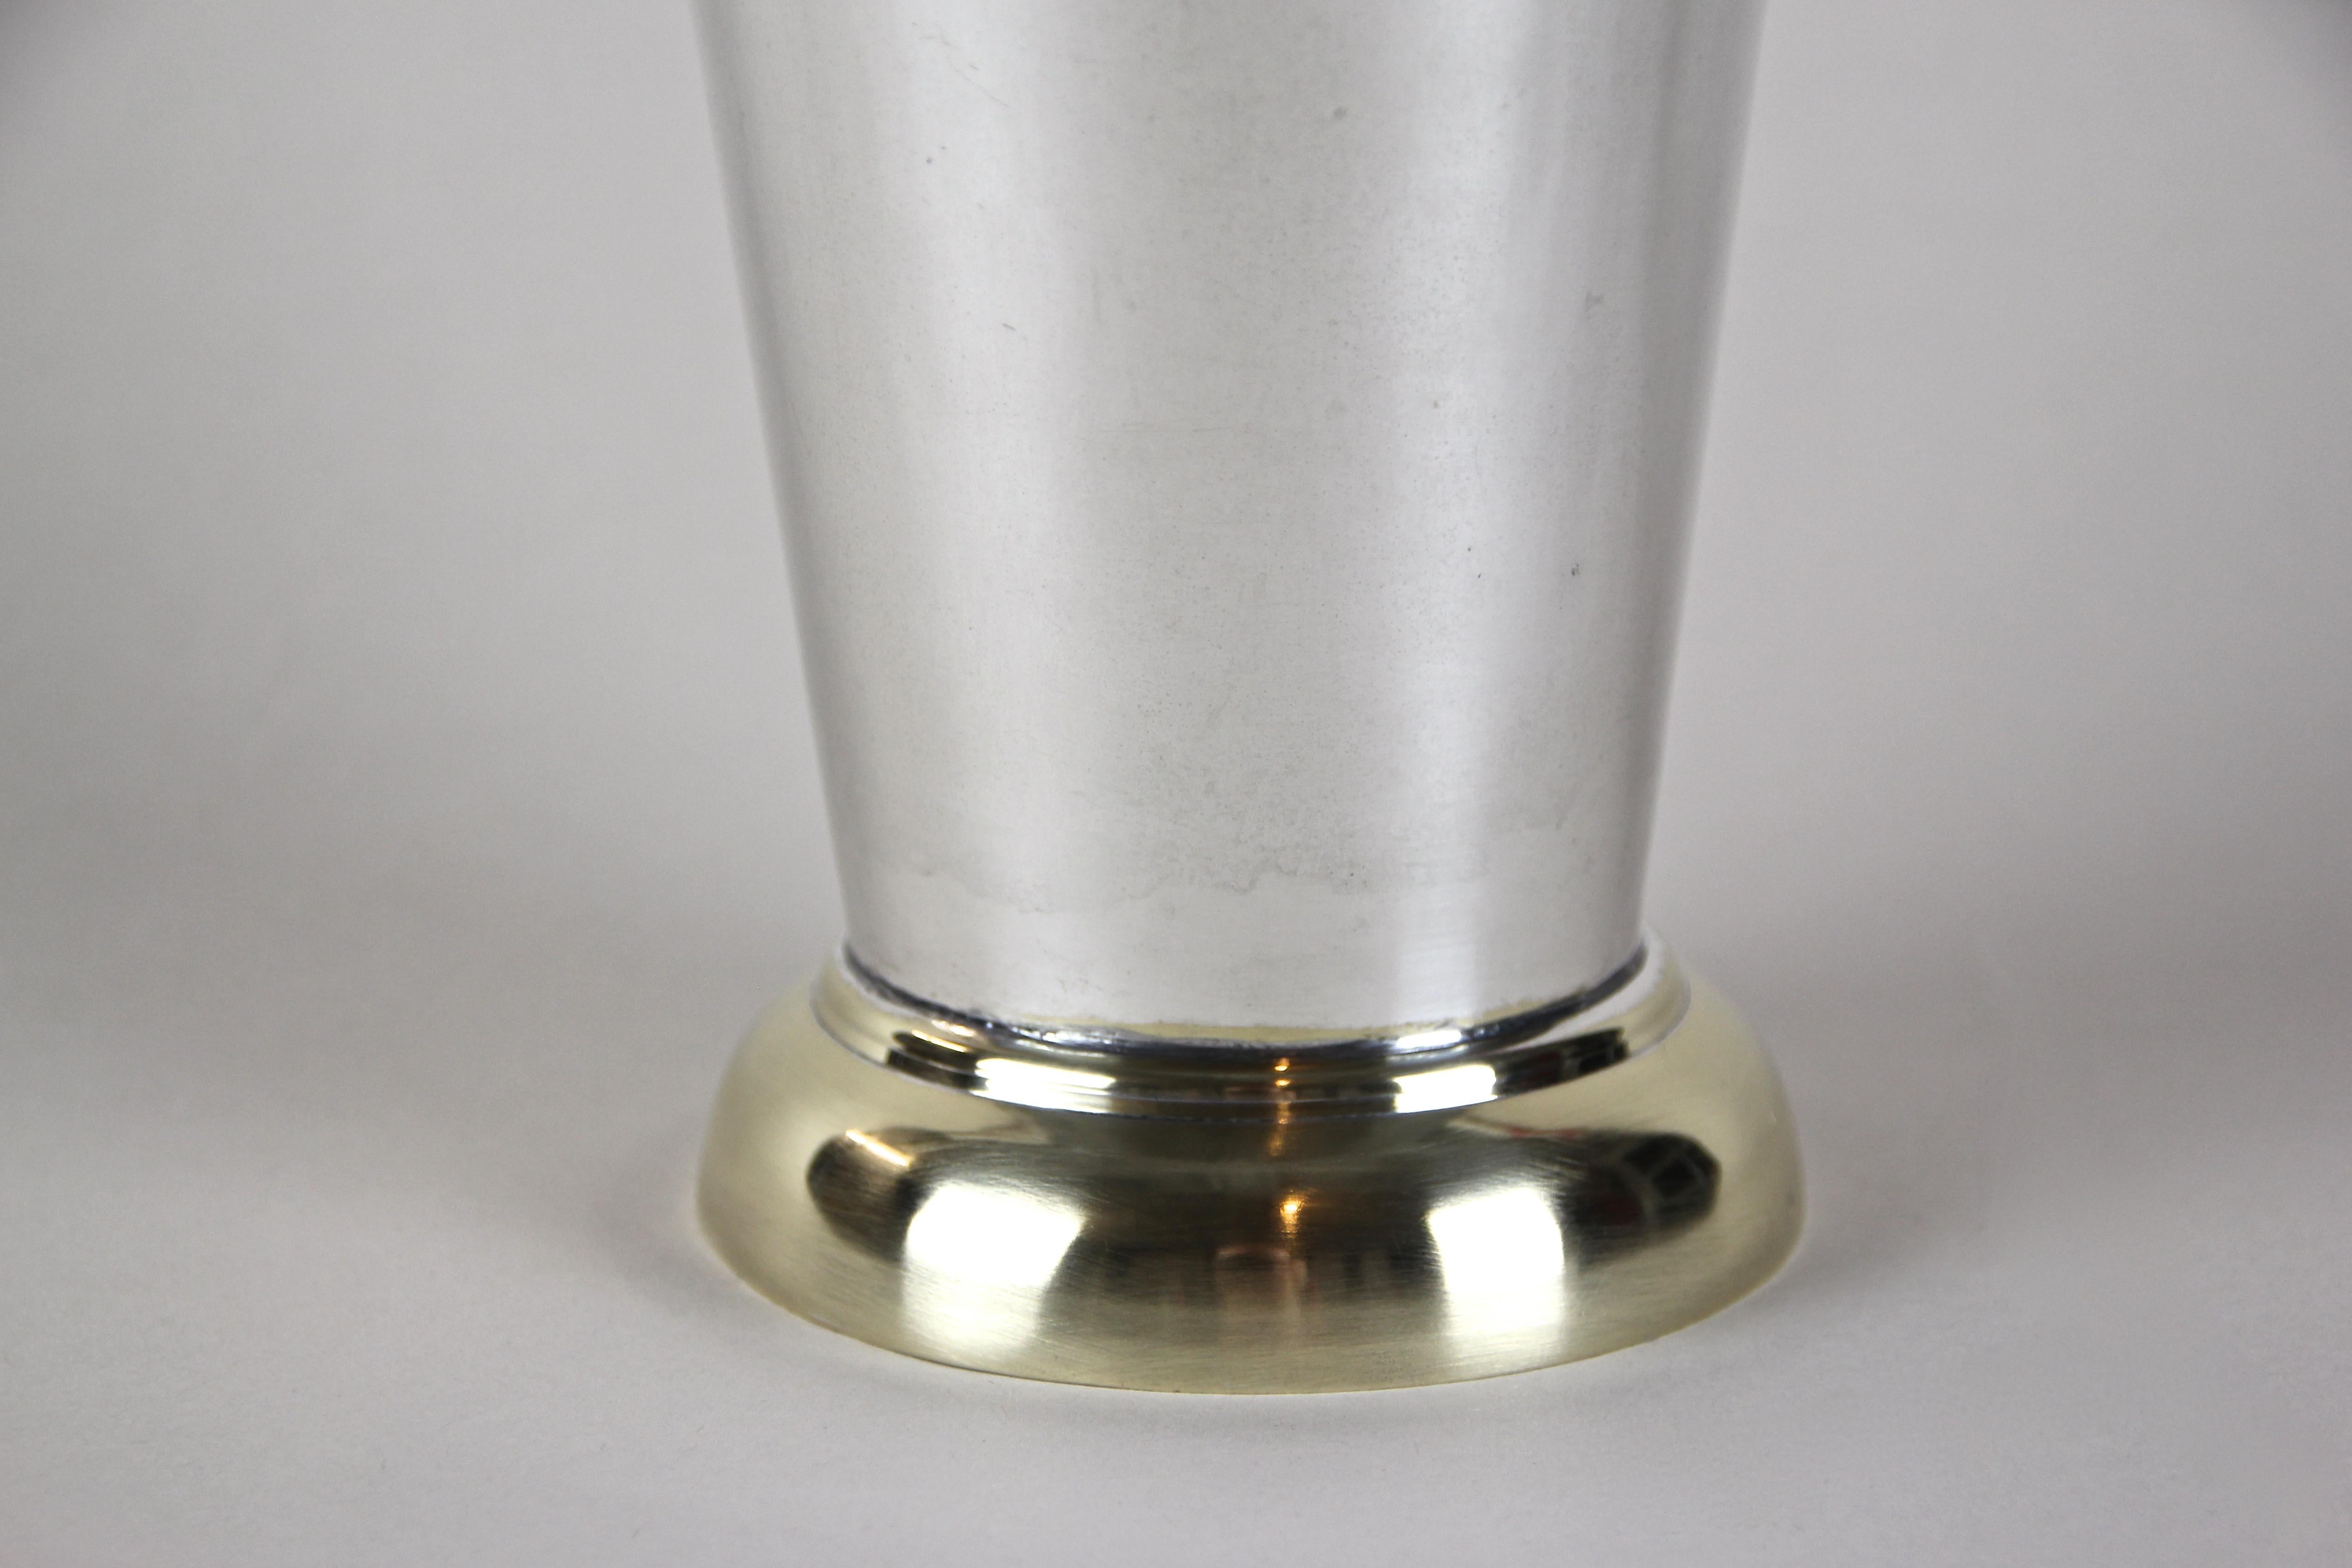 Fine early 20th century silvered brass vase from the Art Deco period in Austria, circa 1920. Shaped like a drop, the timeless designed brass vase shows a beautiful silvered surface standing on a polished brass base. A simple but impressing piece of